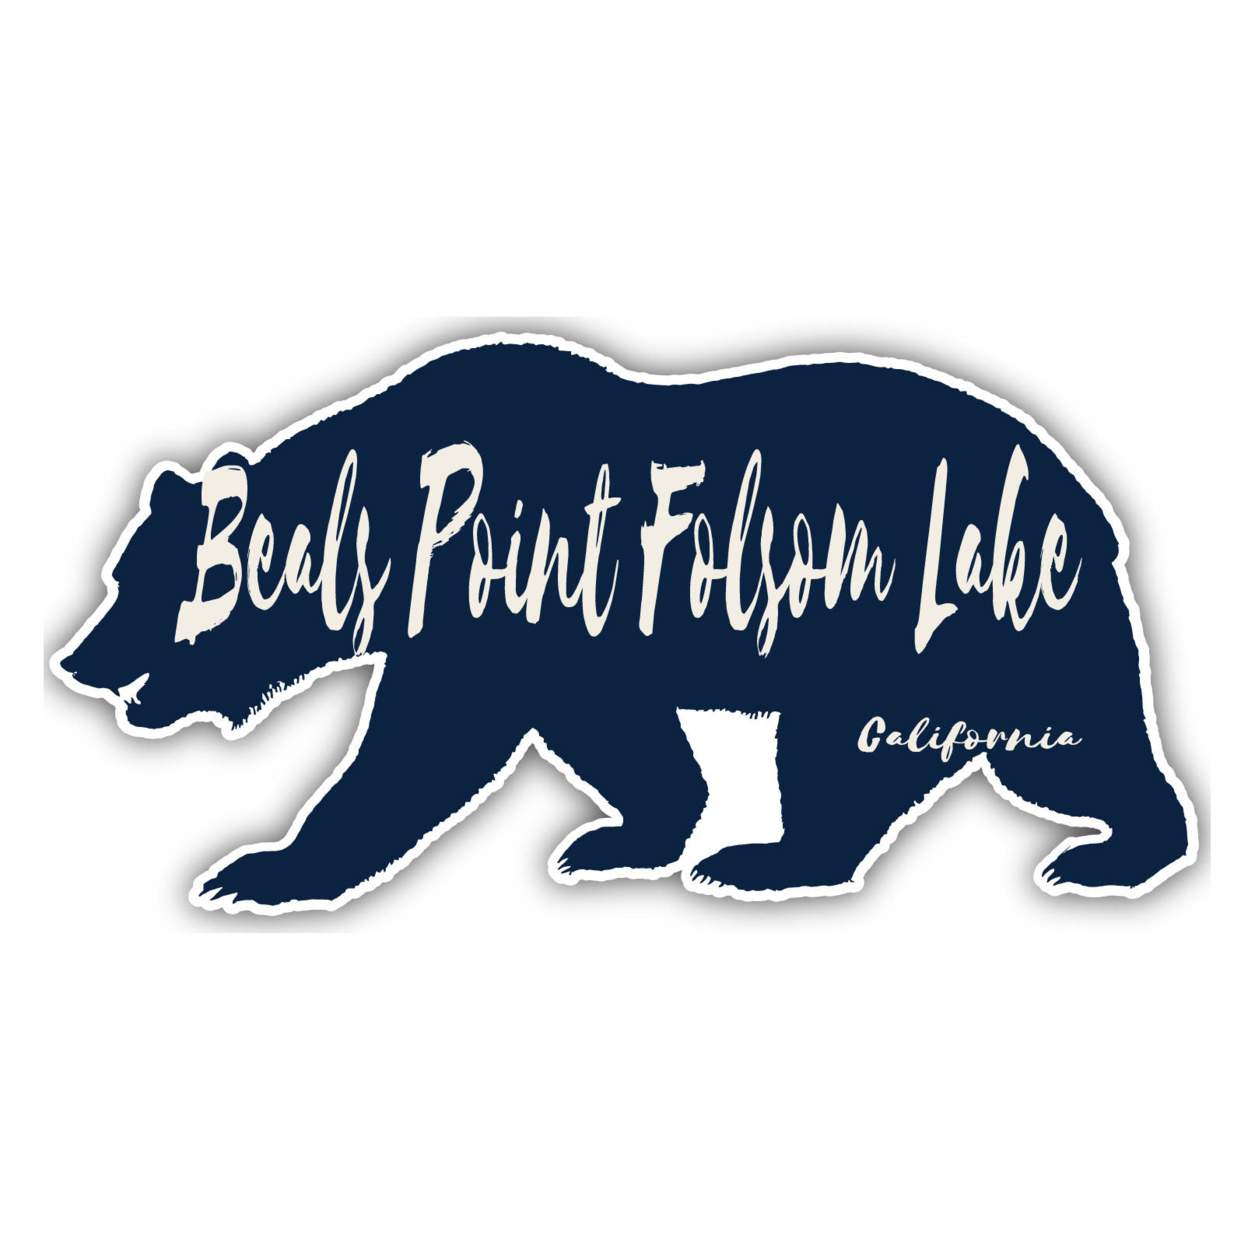 Beals Point Folsom Lake California Souvenir Decorative Stickers (Choose Theme And Size) - 4-Pack, 8-Inch, Camp Life